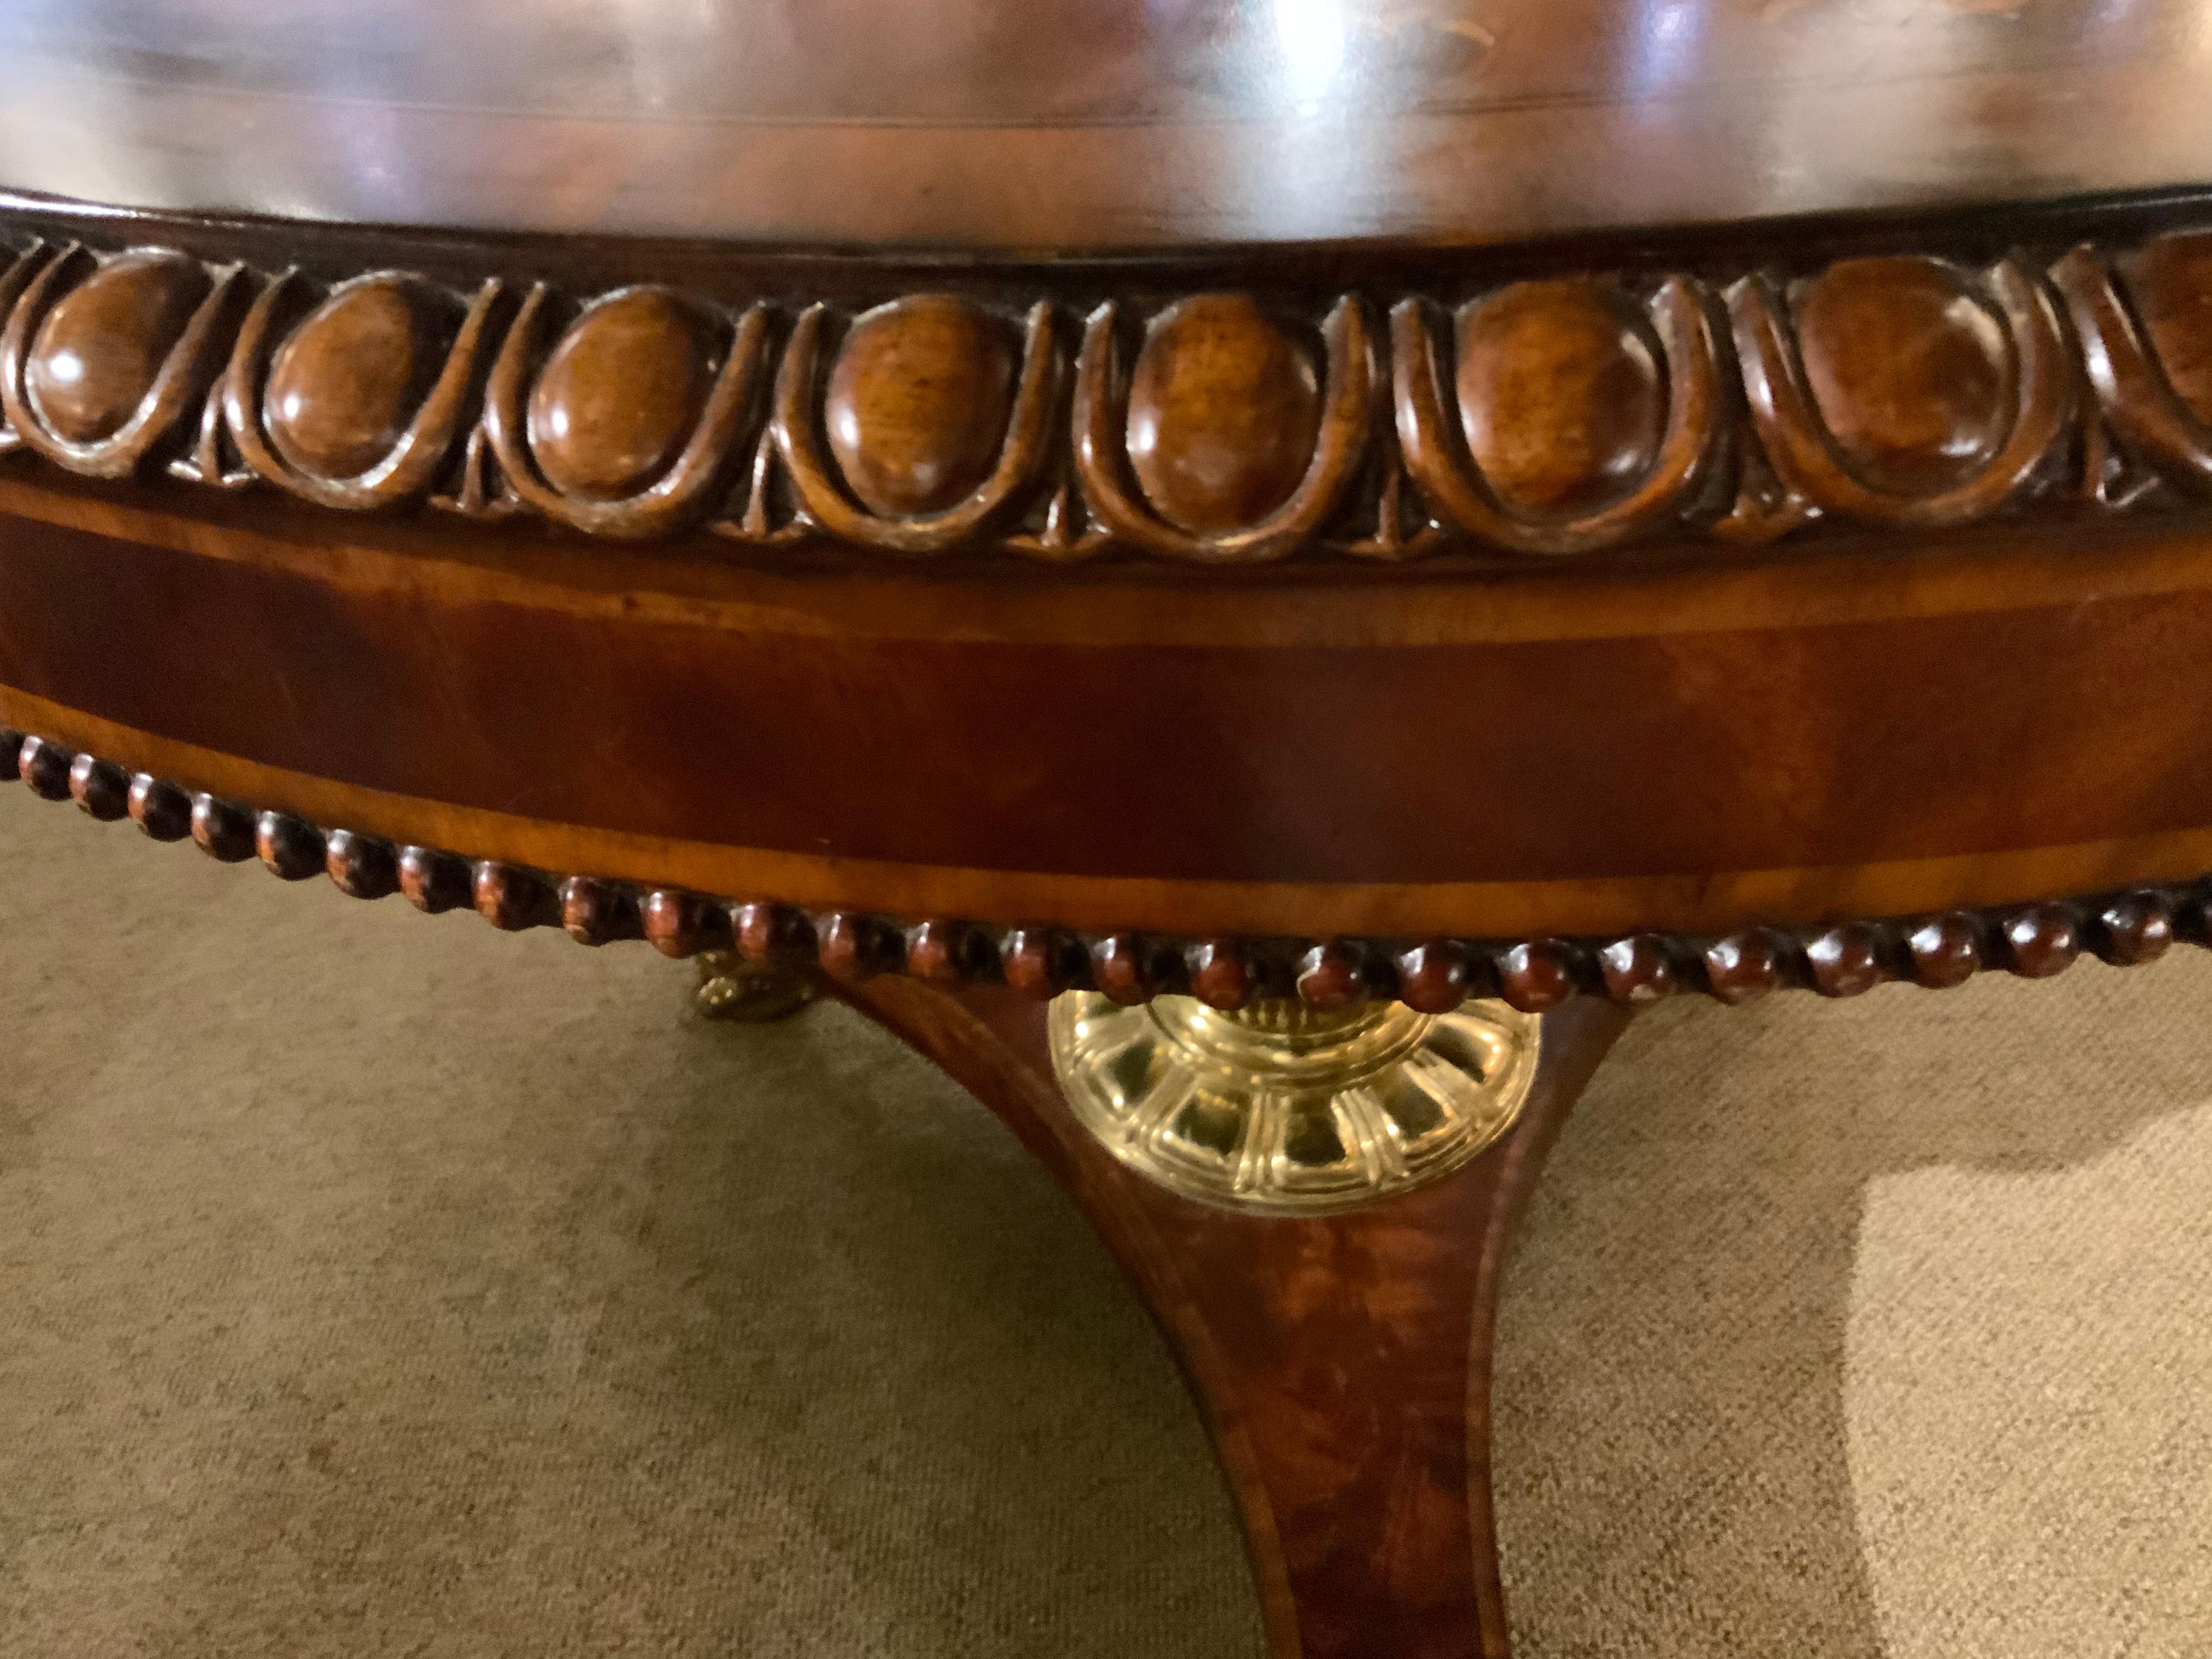 This table is circular, banded with an egg-and-dart gadroon
Carved edge and fine marquetry inlay, supported by a polished
Bronze reeded column, mounted to a triangular-form platform 
Base with polished bronze feet. It has not been re